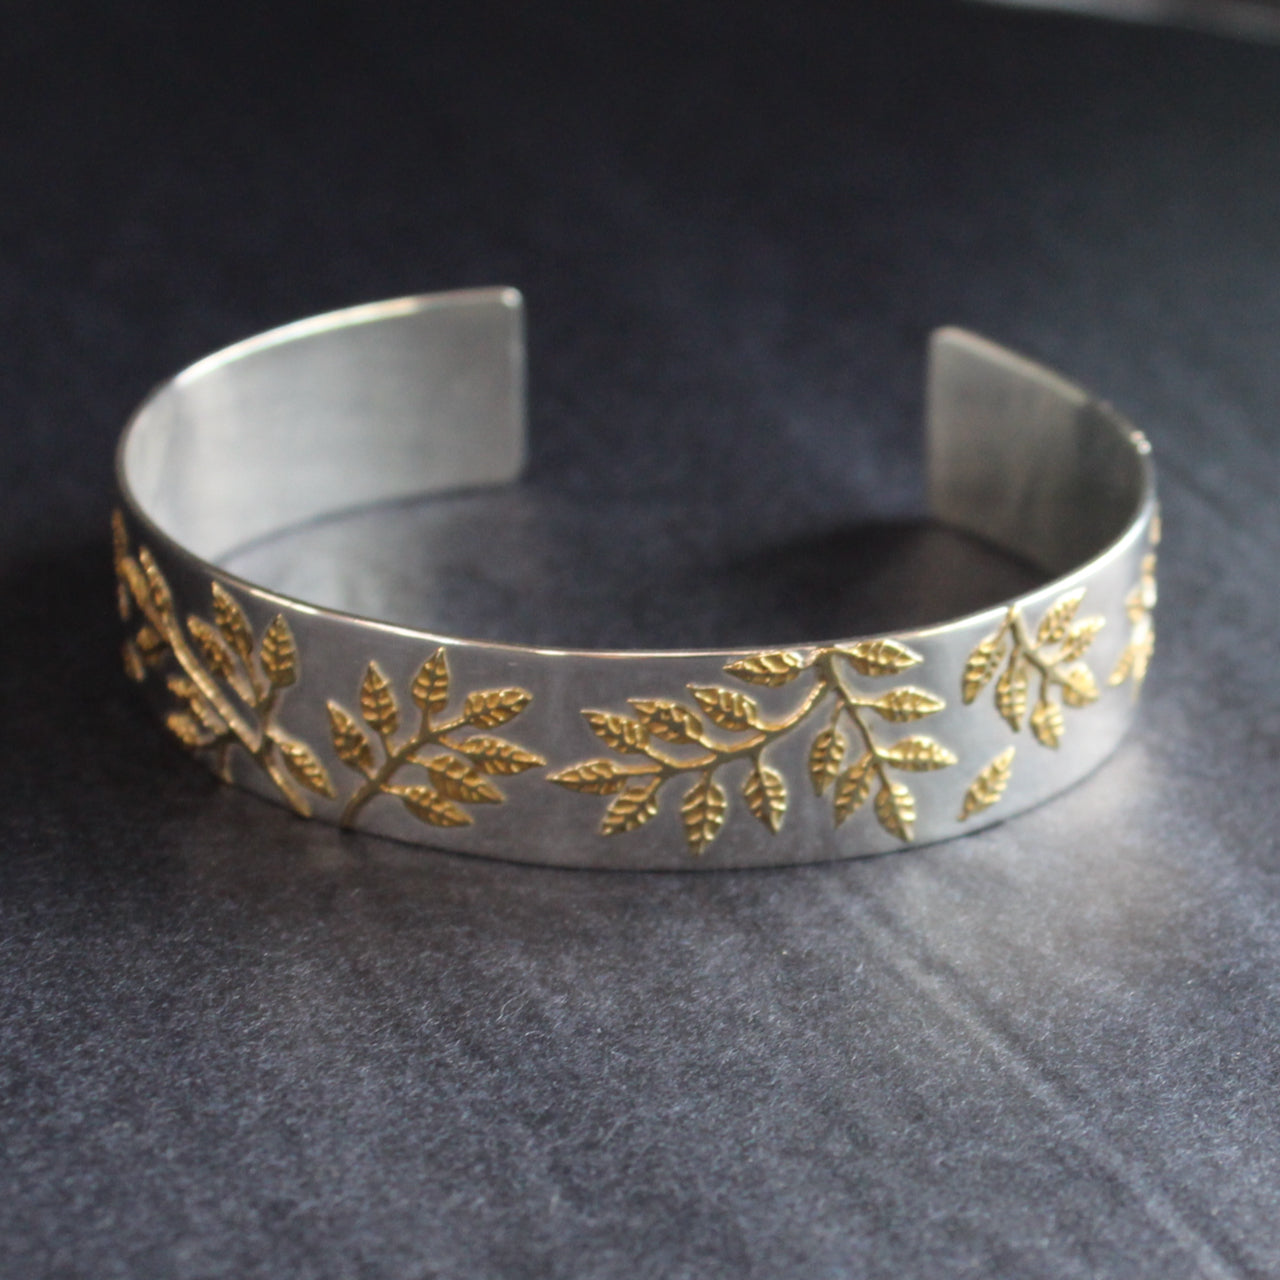 Plantae bangle in silver with gold leaf detail by Beverly Bartlett